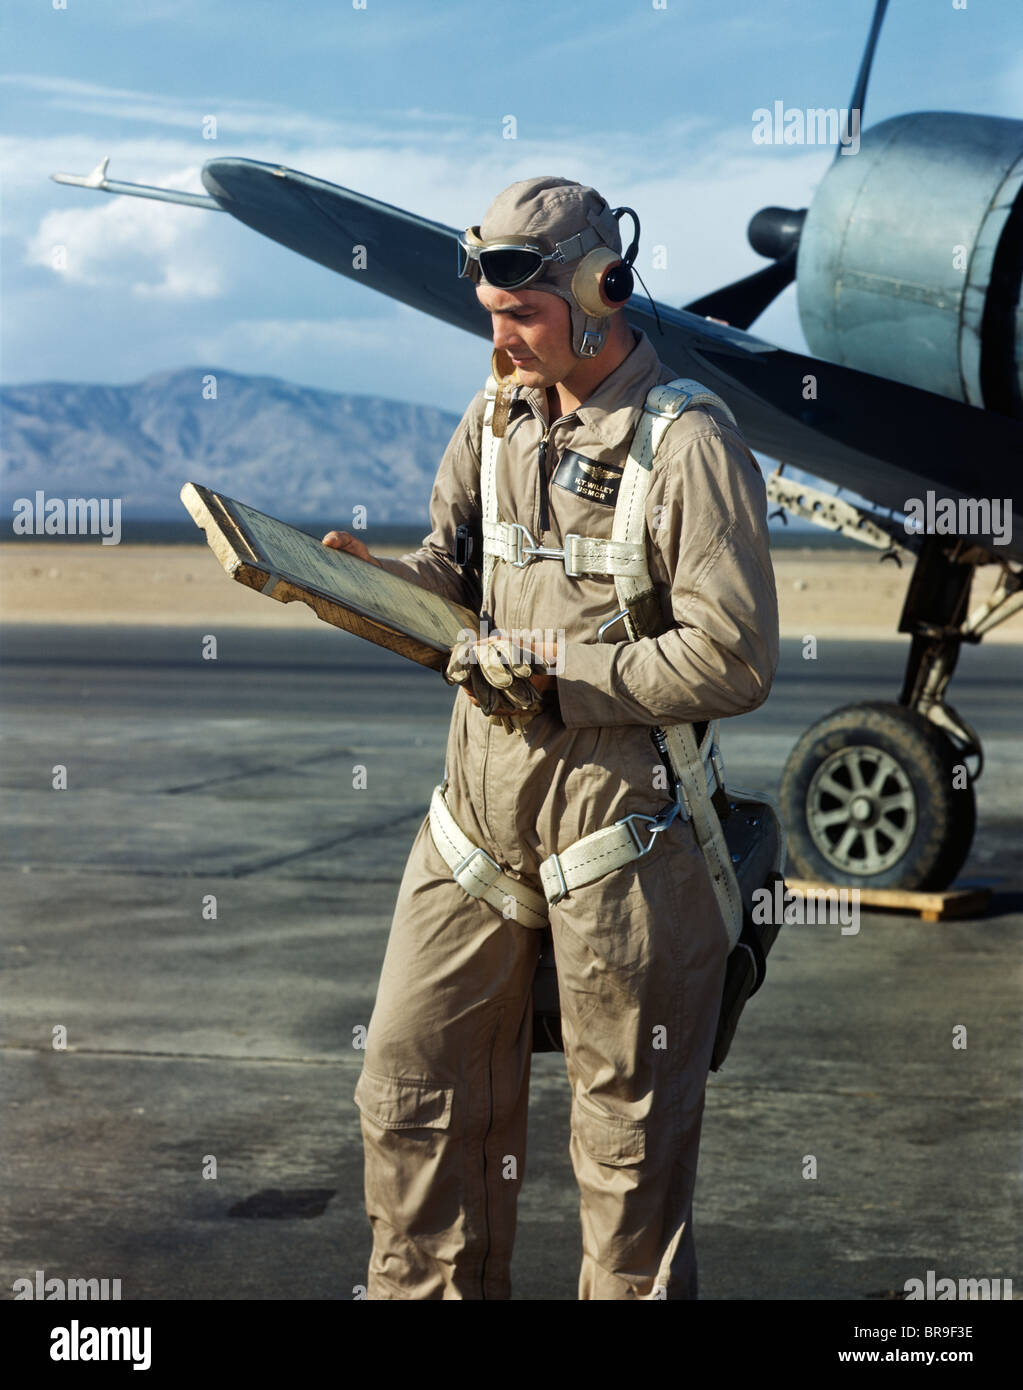 1940s AIR FORCE PILOT STANDING BY PLANE GOING OVER CHECKLIST FLIGHT PLAN  WEARING FLYING GOGGLES HELMET COVERALLS AND PARACHUTE Stock Photo - Alamy